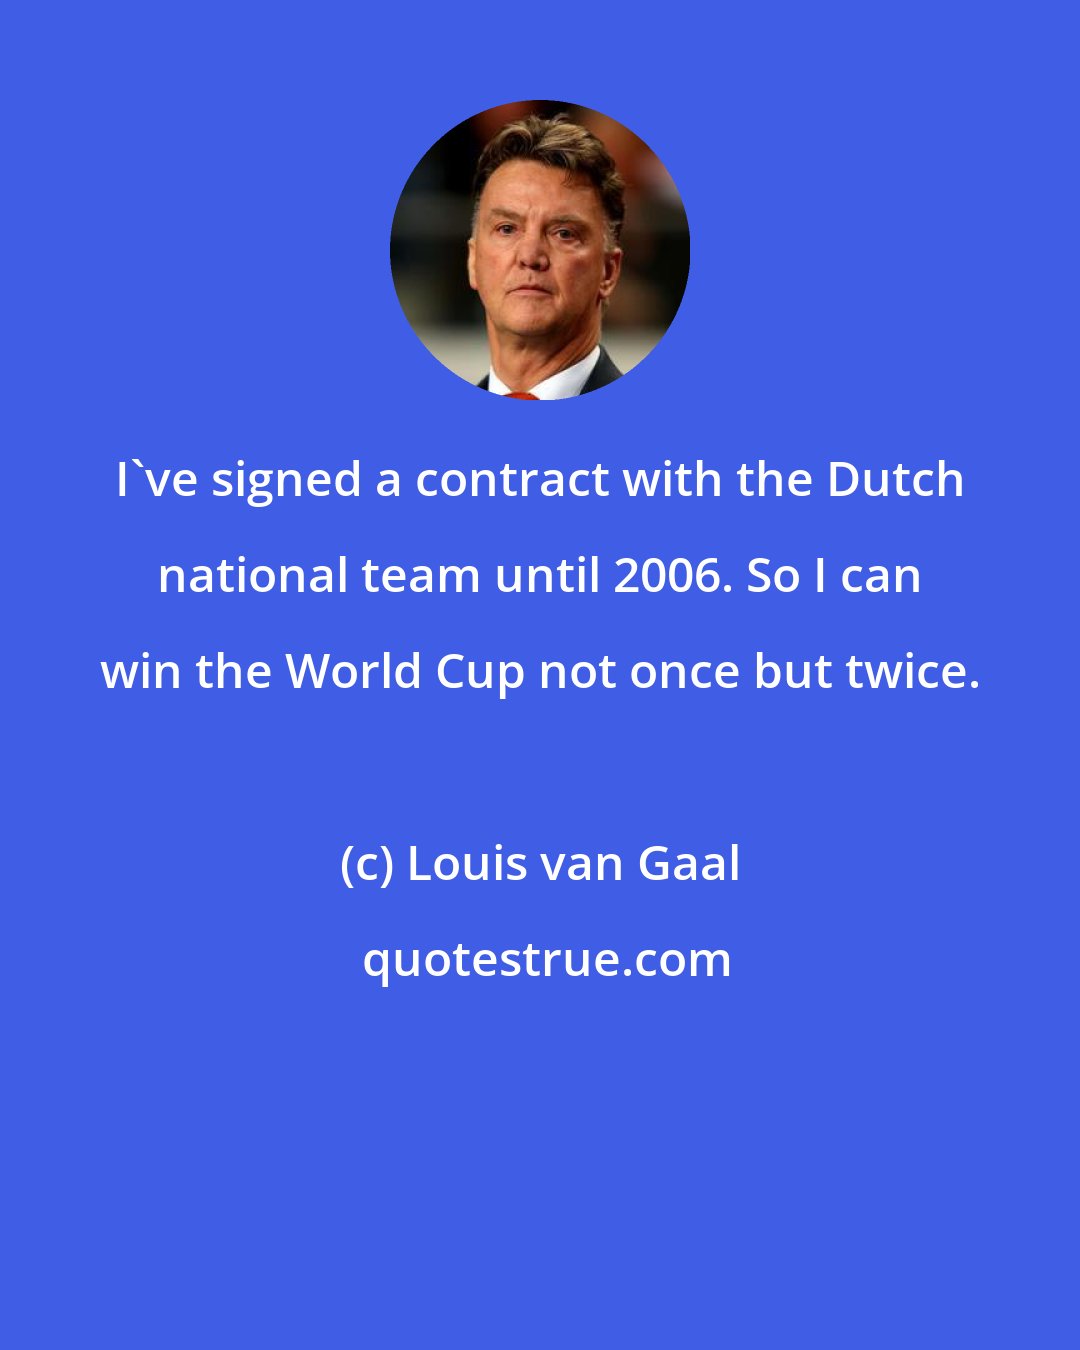 Louis van Gaal: I've signed a contract with the Dutch national team until 2006. So I can win the World Cup not once but twice.